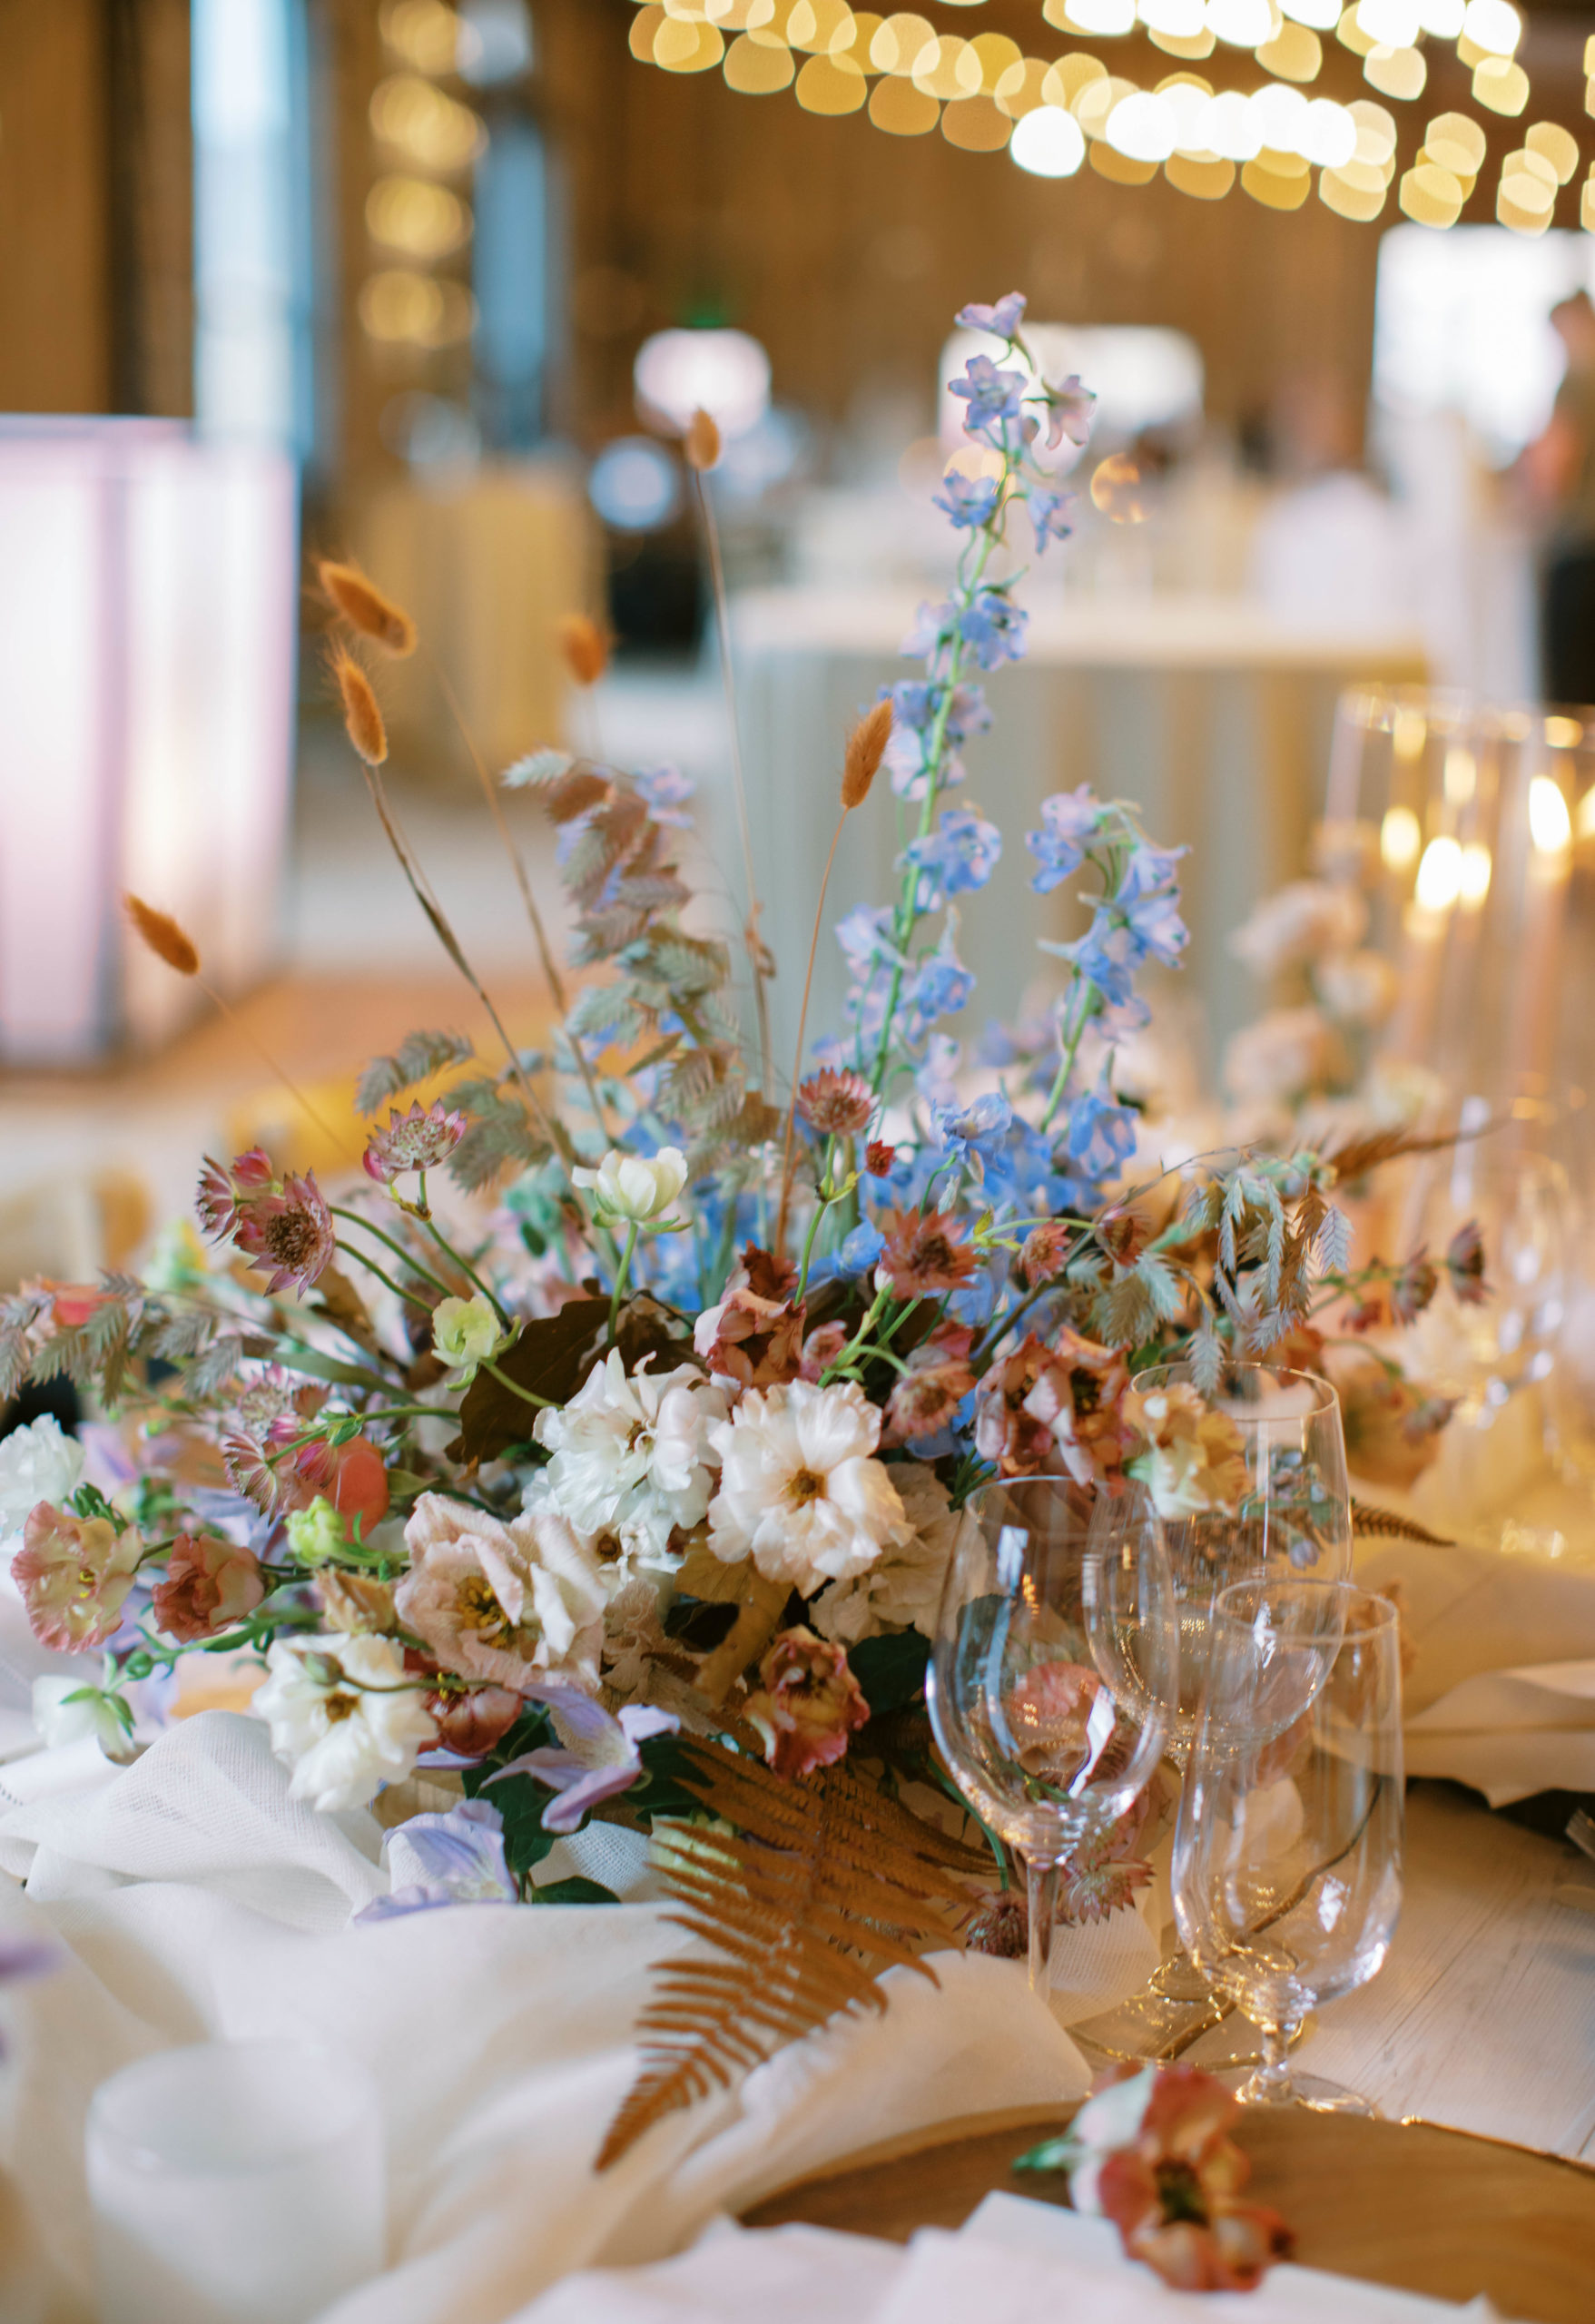 eclectic wildflower wedding centerpieces at this unique utah ranch wedding. photo by megan robinson photography